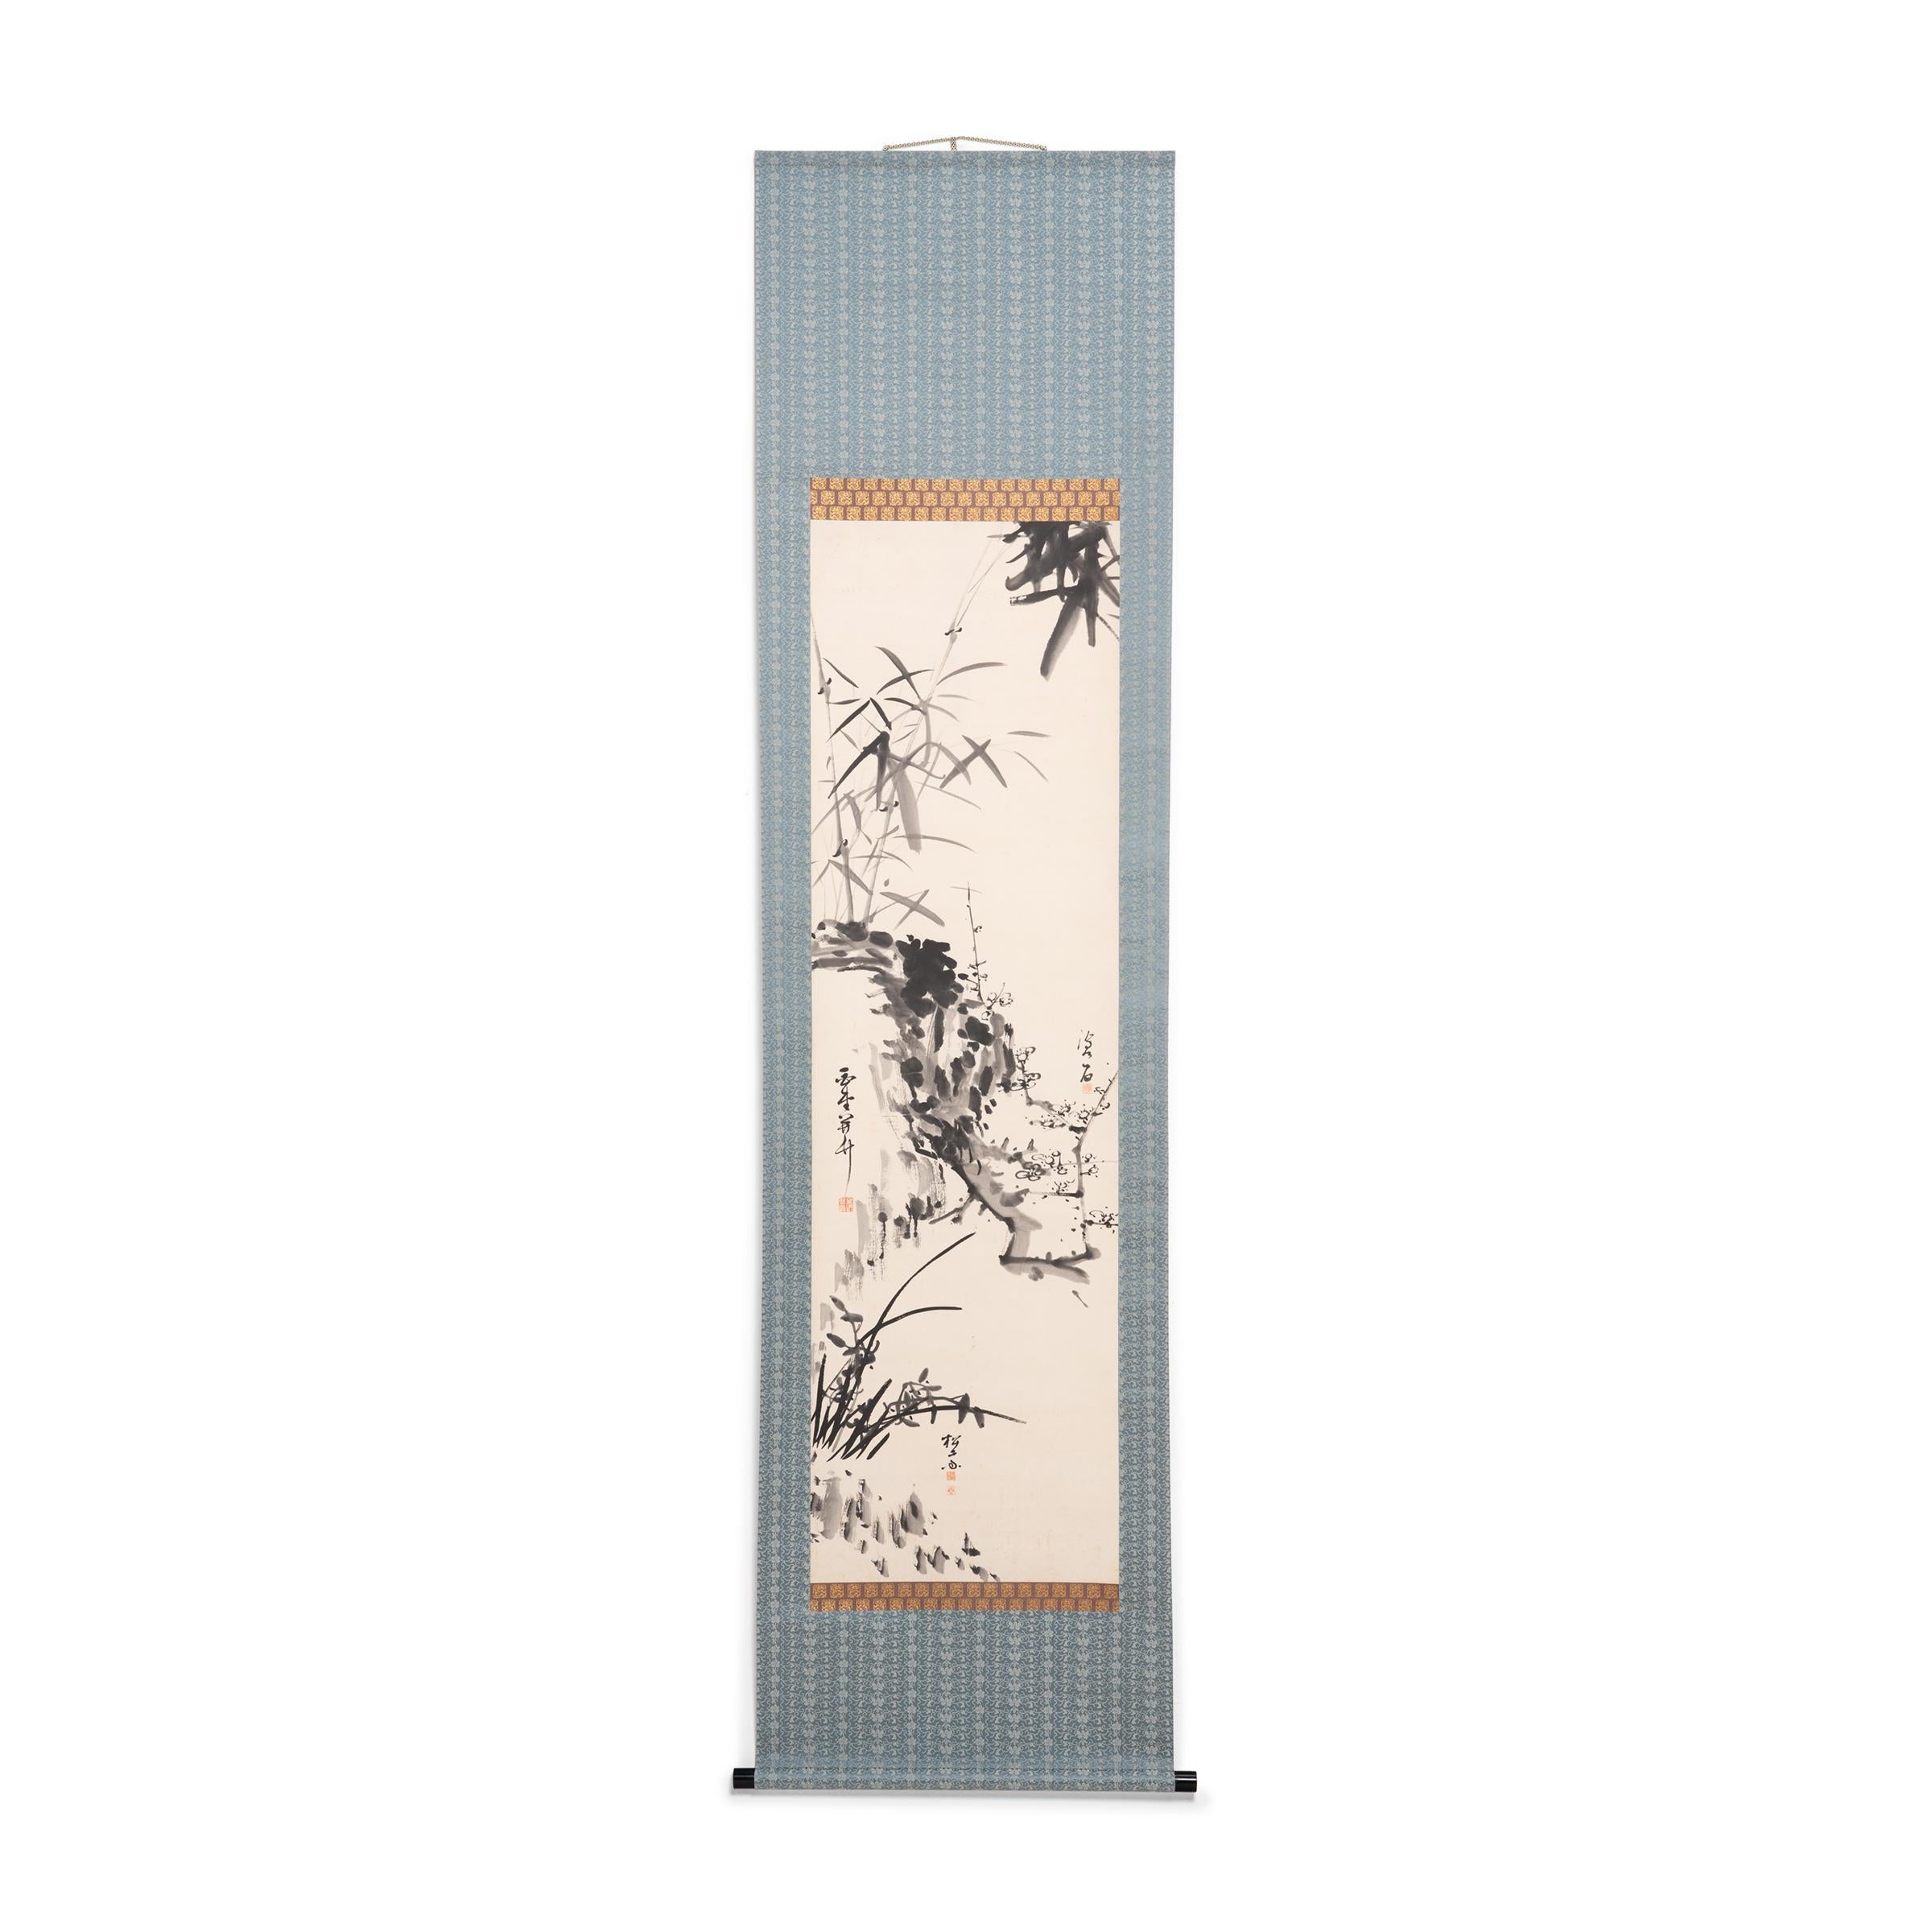 Unknown Landscape Art - Korean Hanging Scroll of Bamboo, Prunus, and Orchids